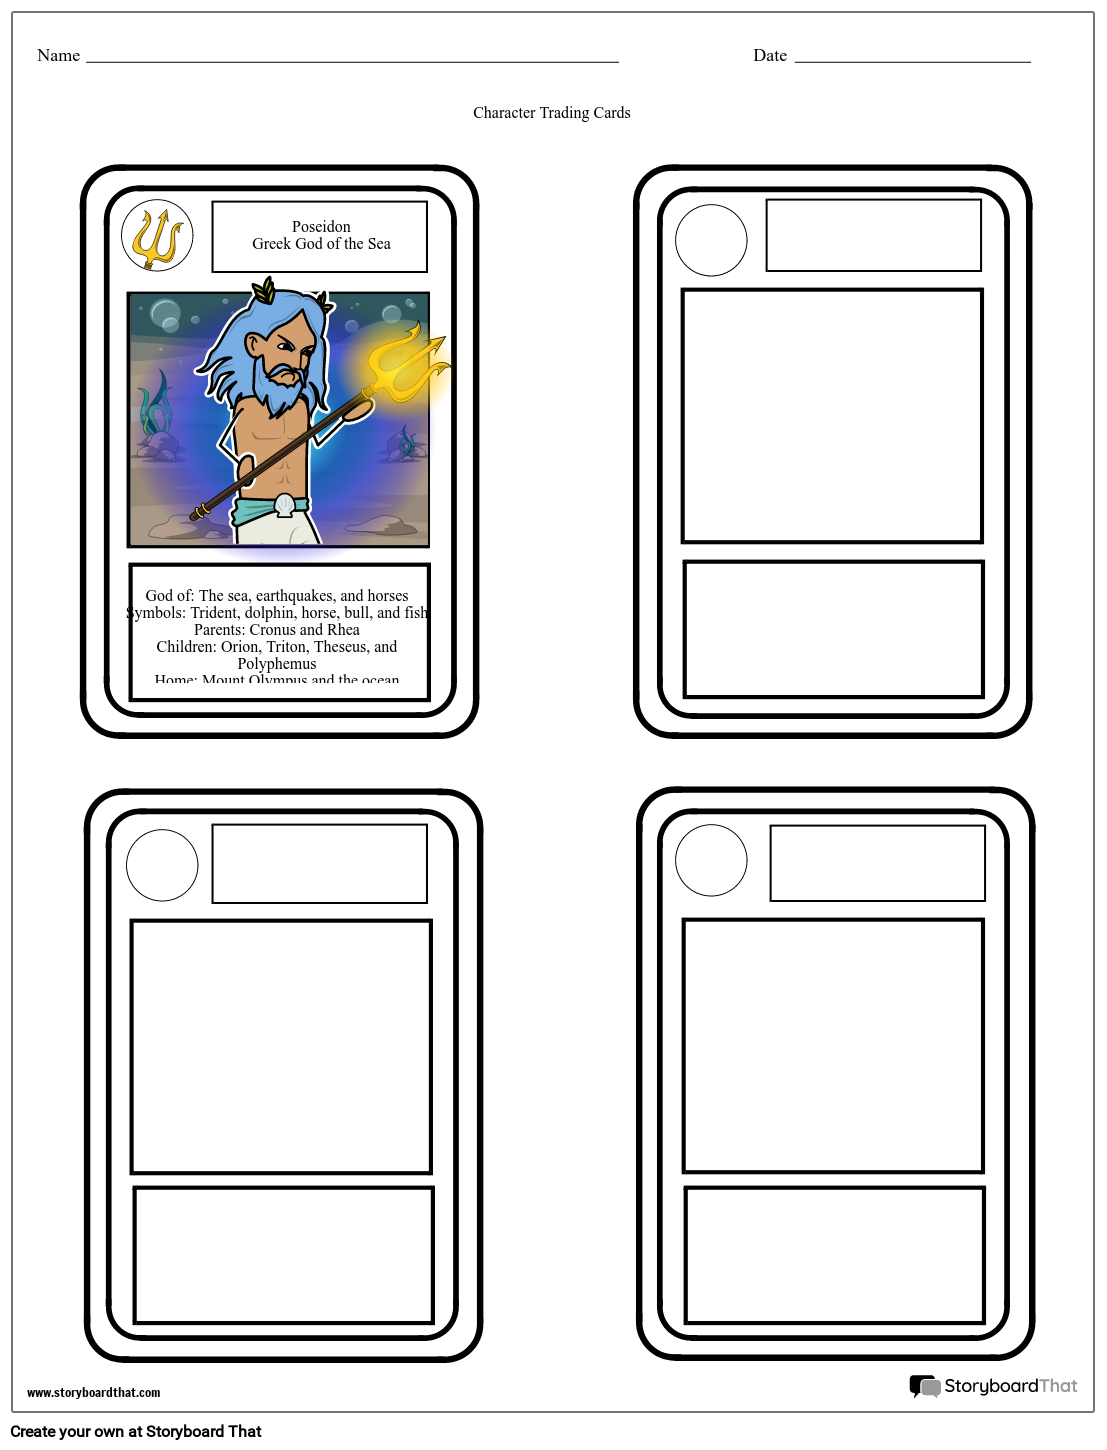 Design Your Own Printable Trading Card Template for Students